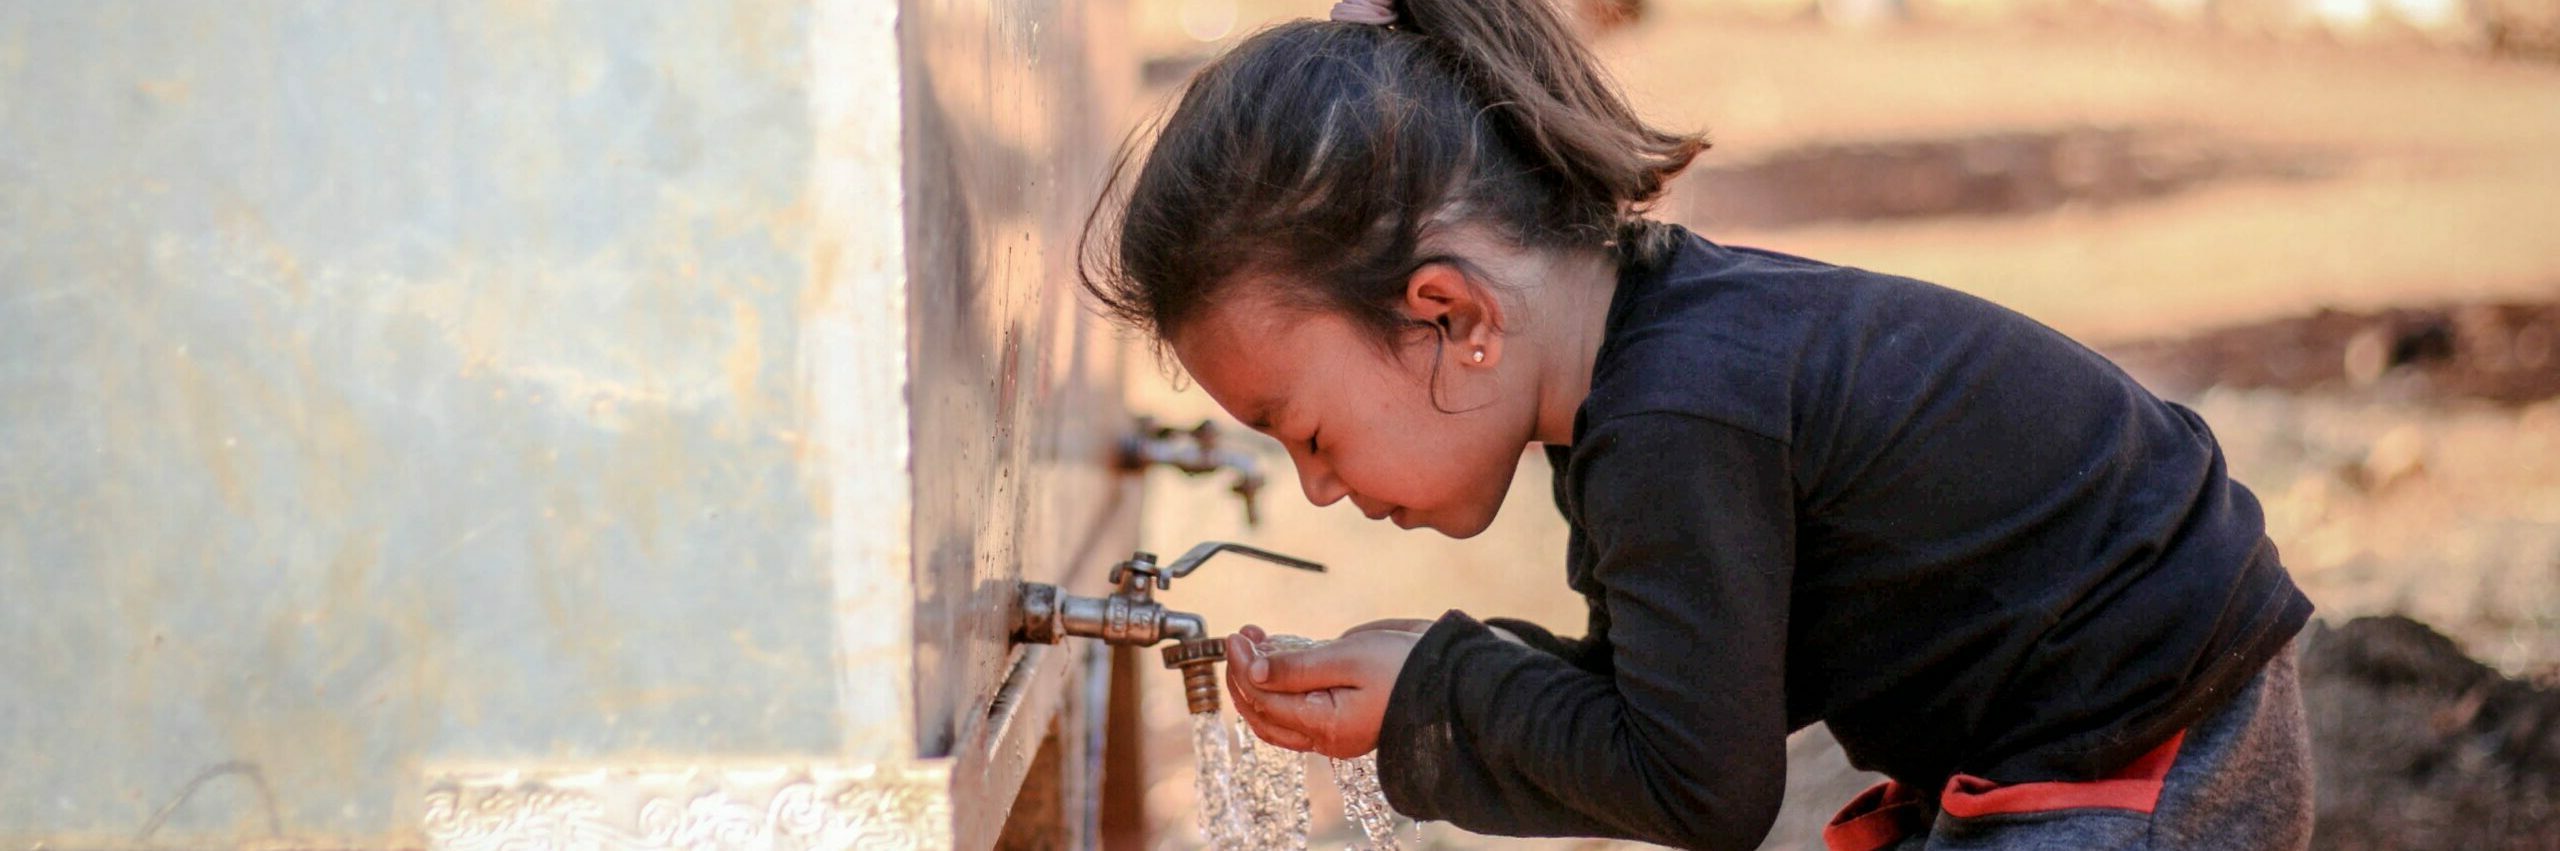 Child drinking water from outdoor tap water well